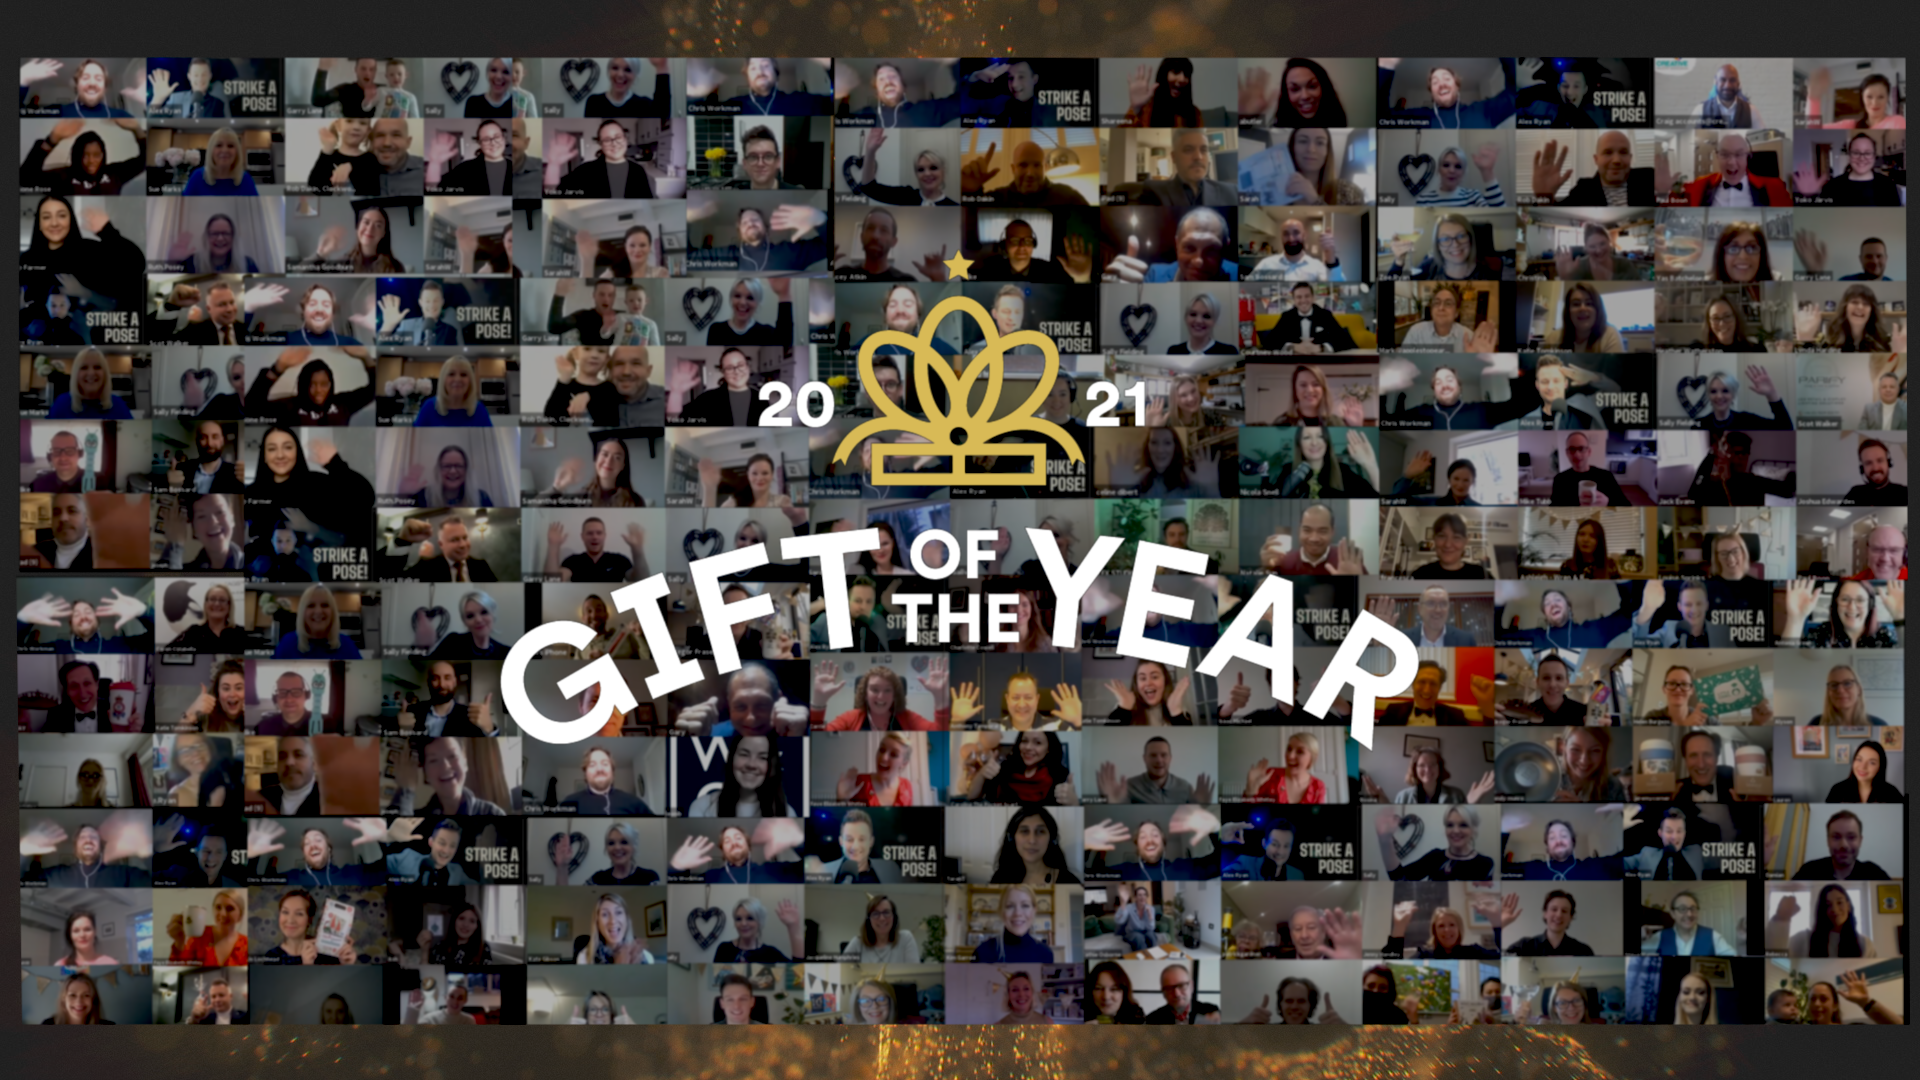 Above: The Gift of the Year awards attracted over 700 entries this year. 